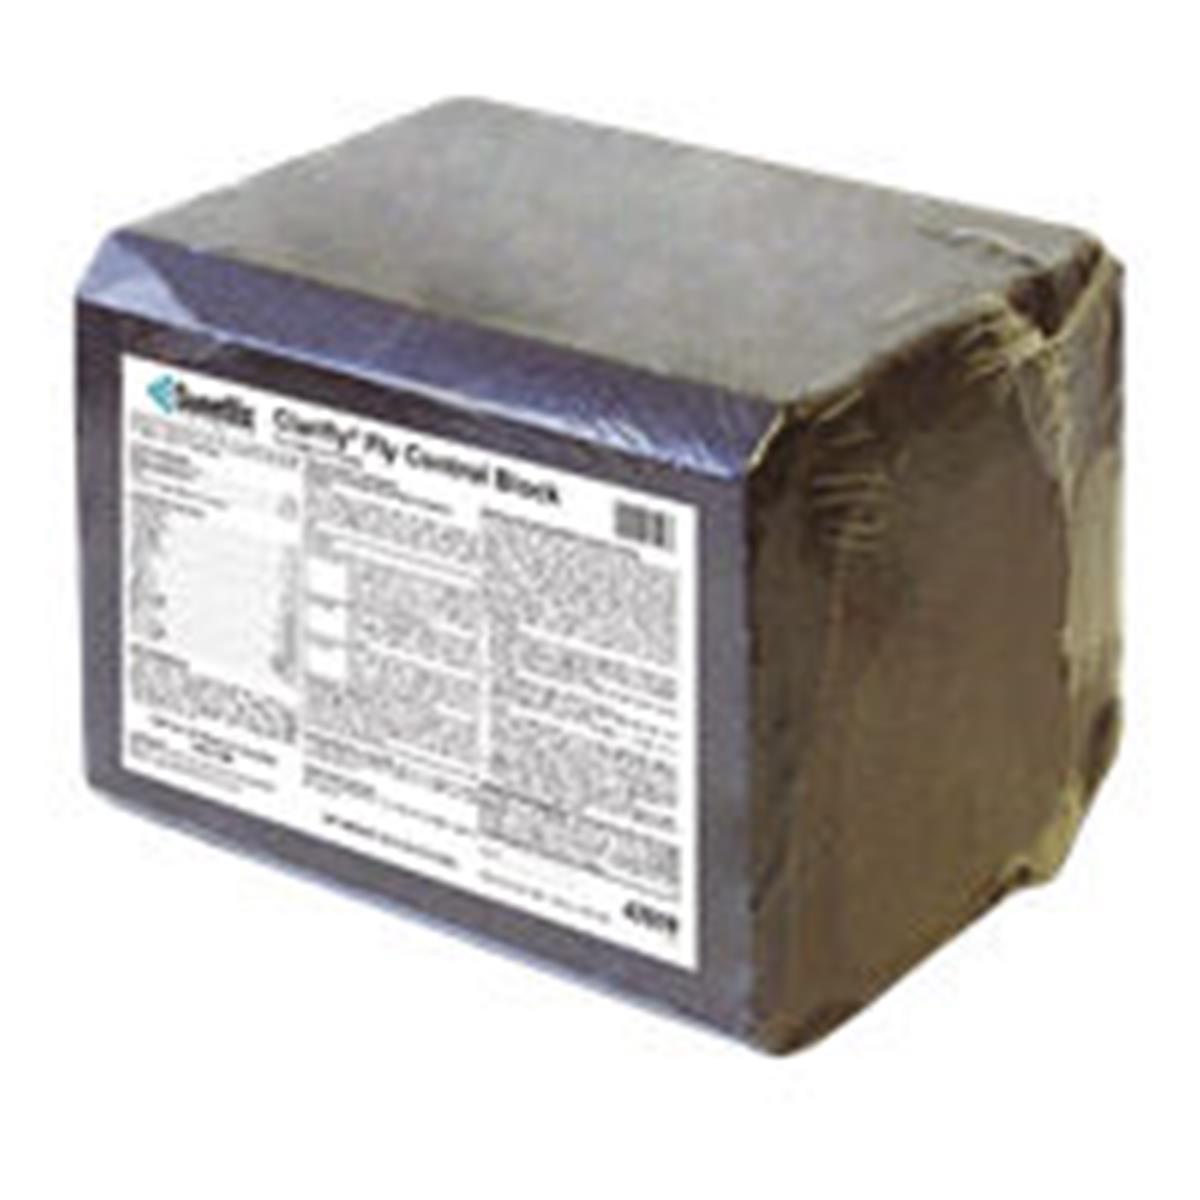 Picture of YF 1103483 33 lbs Clarifly Fly Control Block